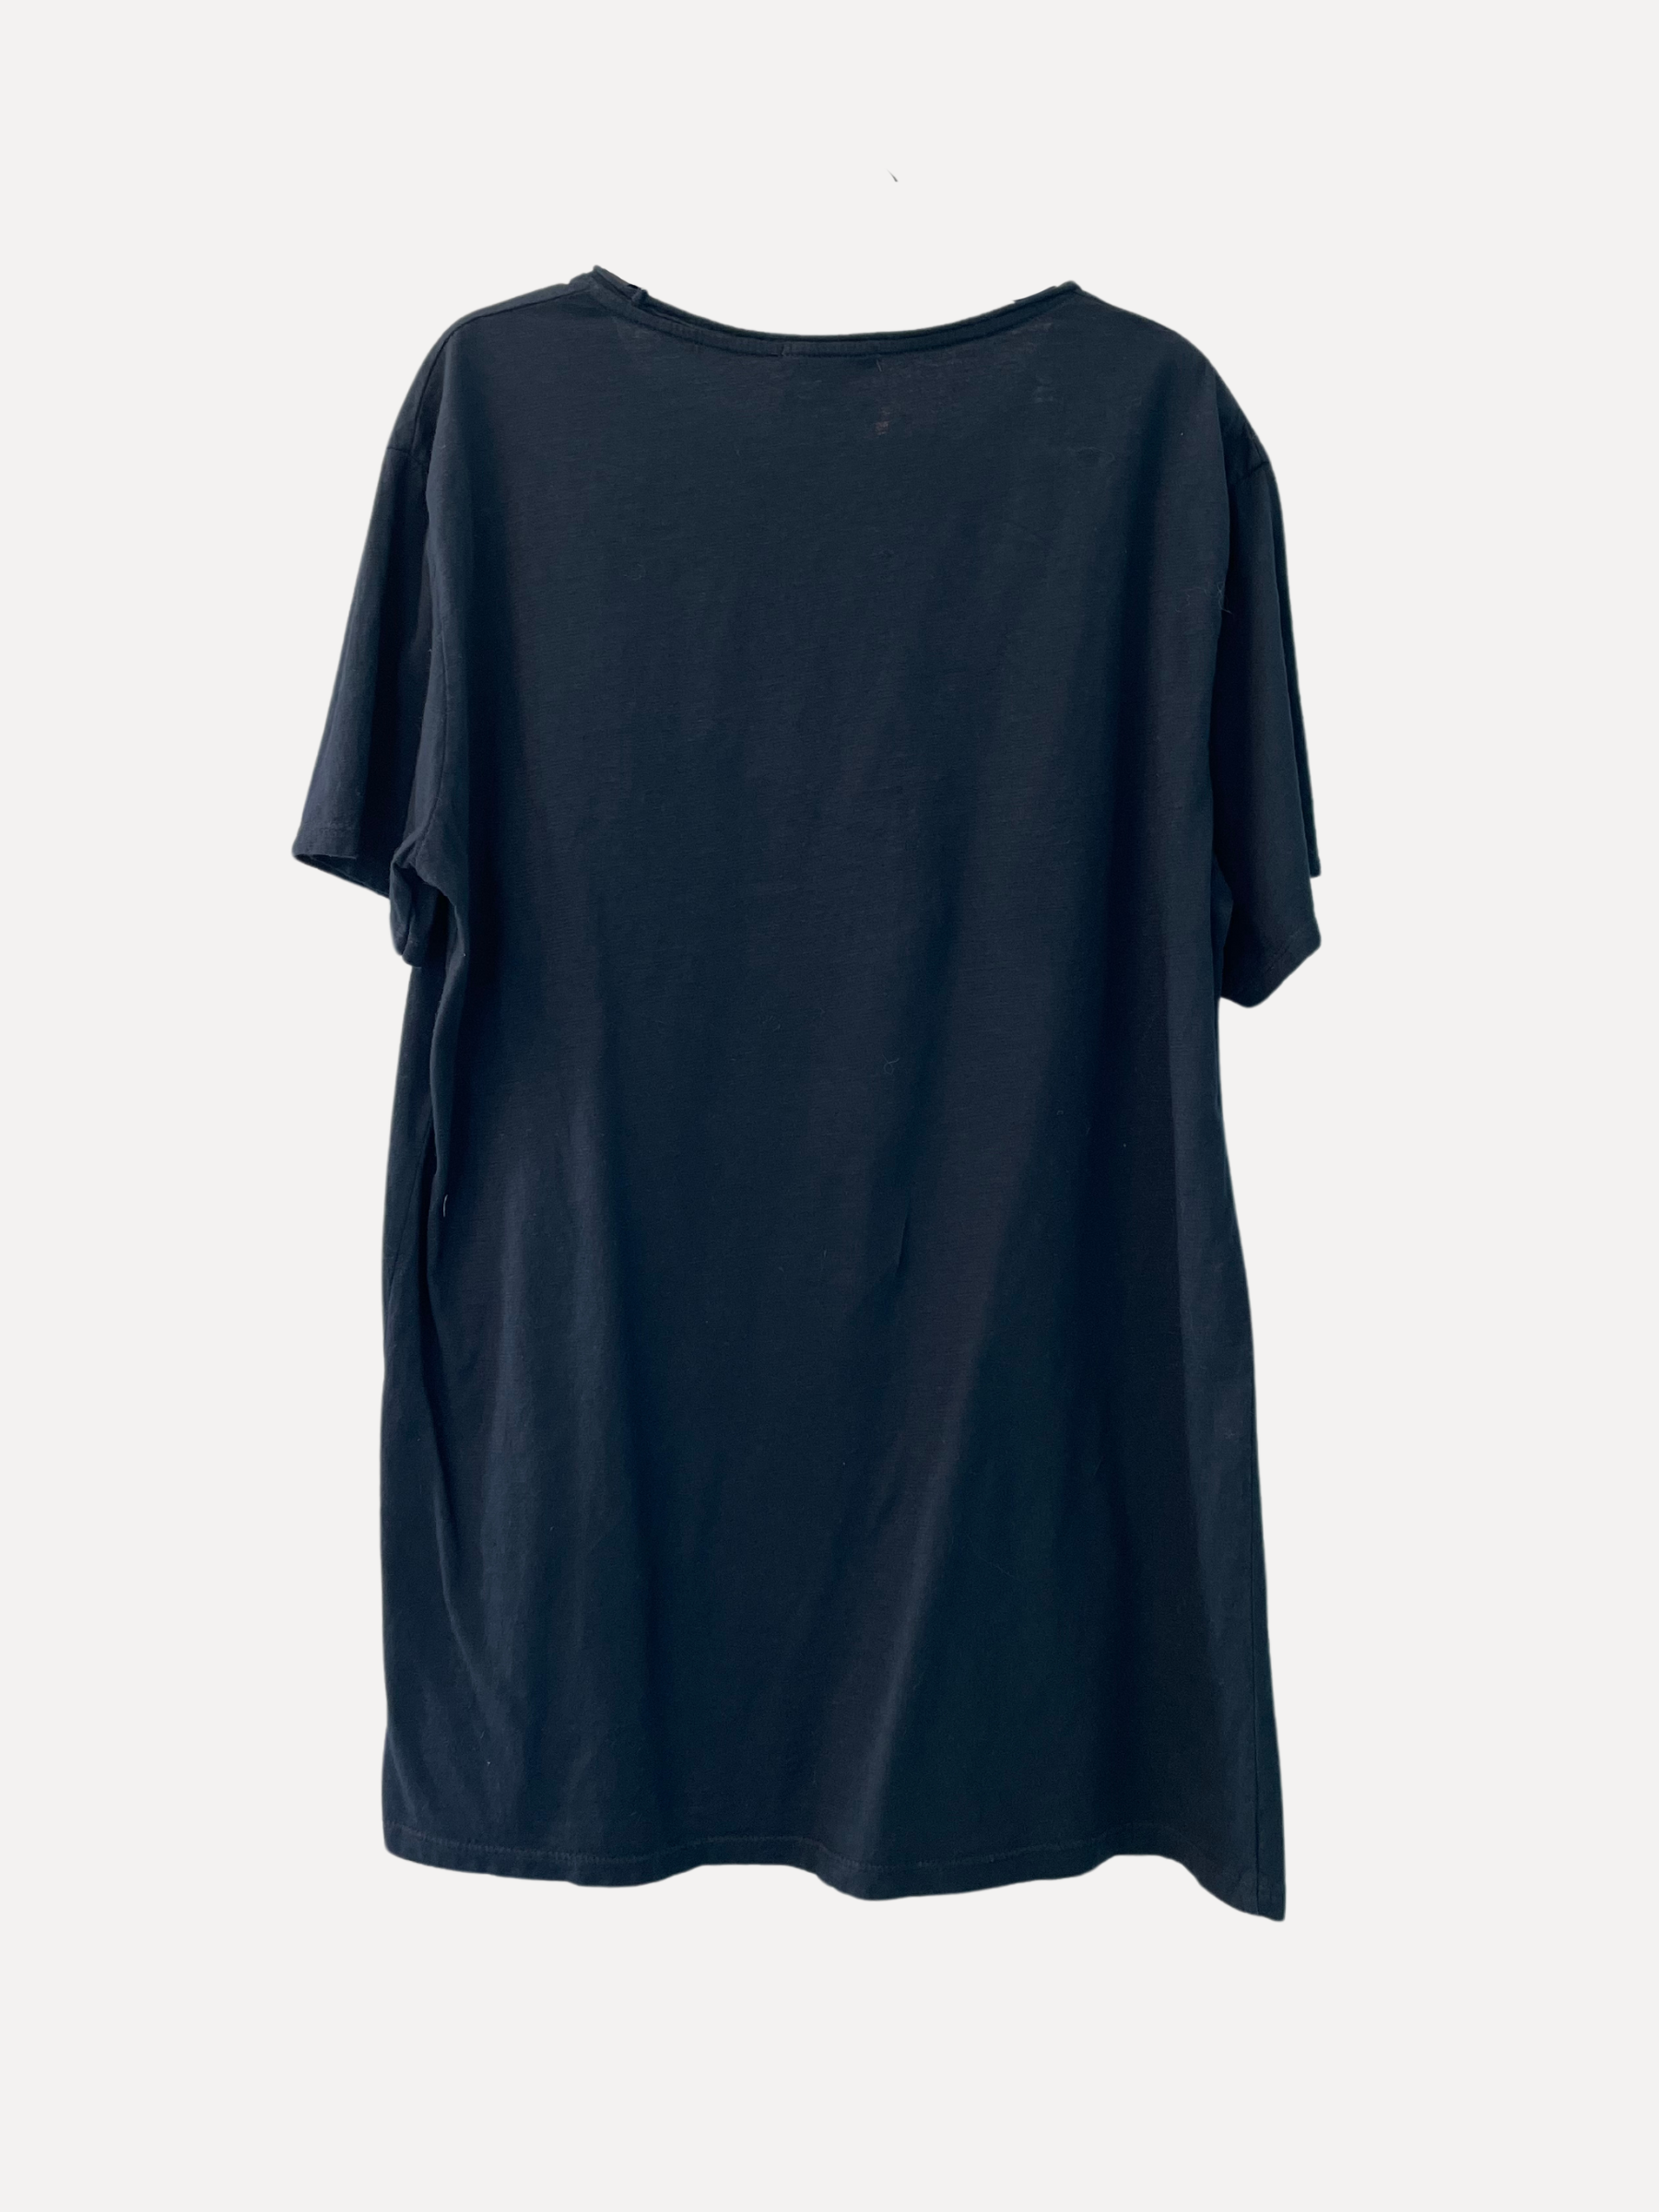 MIKE T-Shirt, Navy